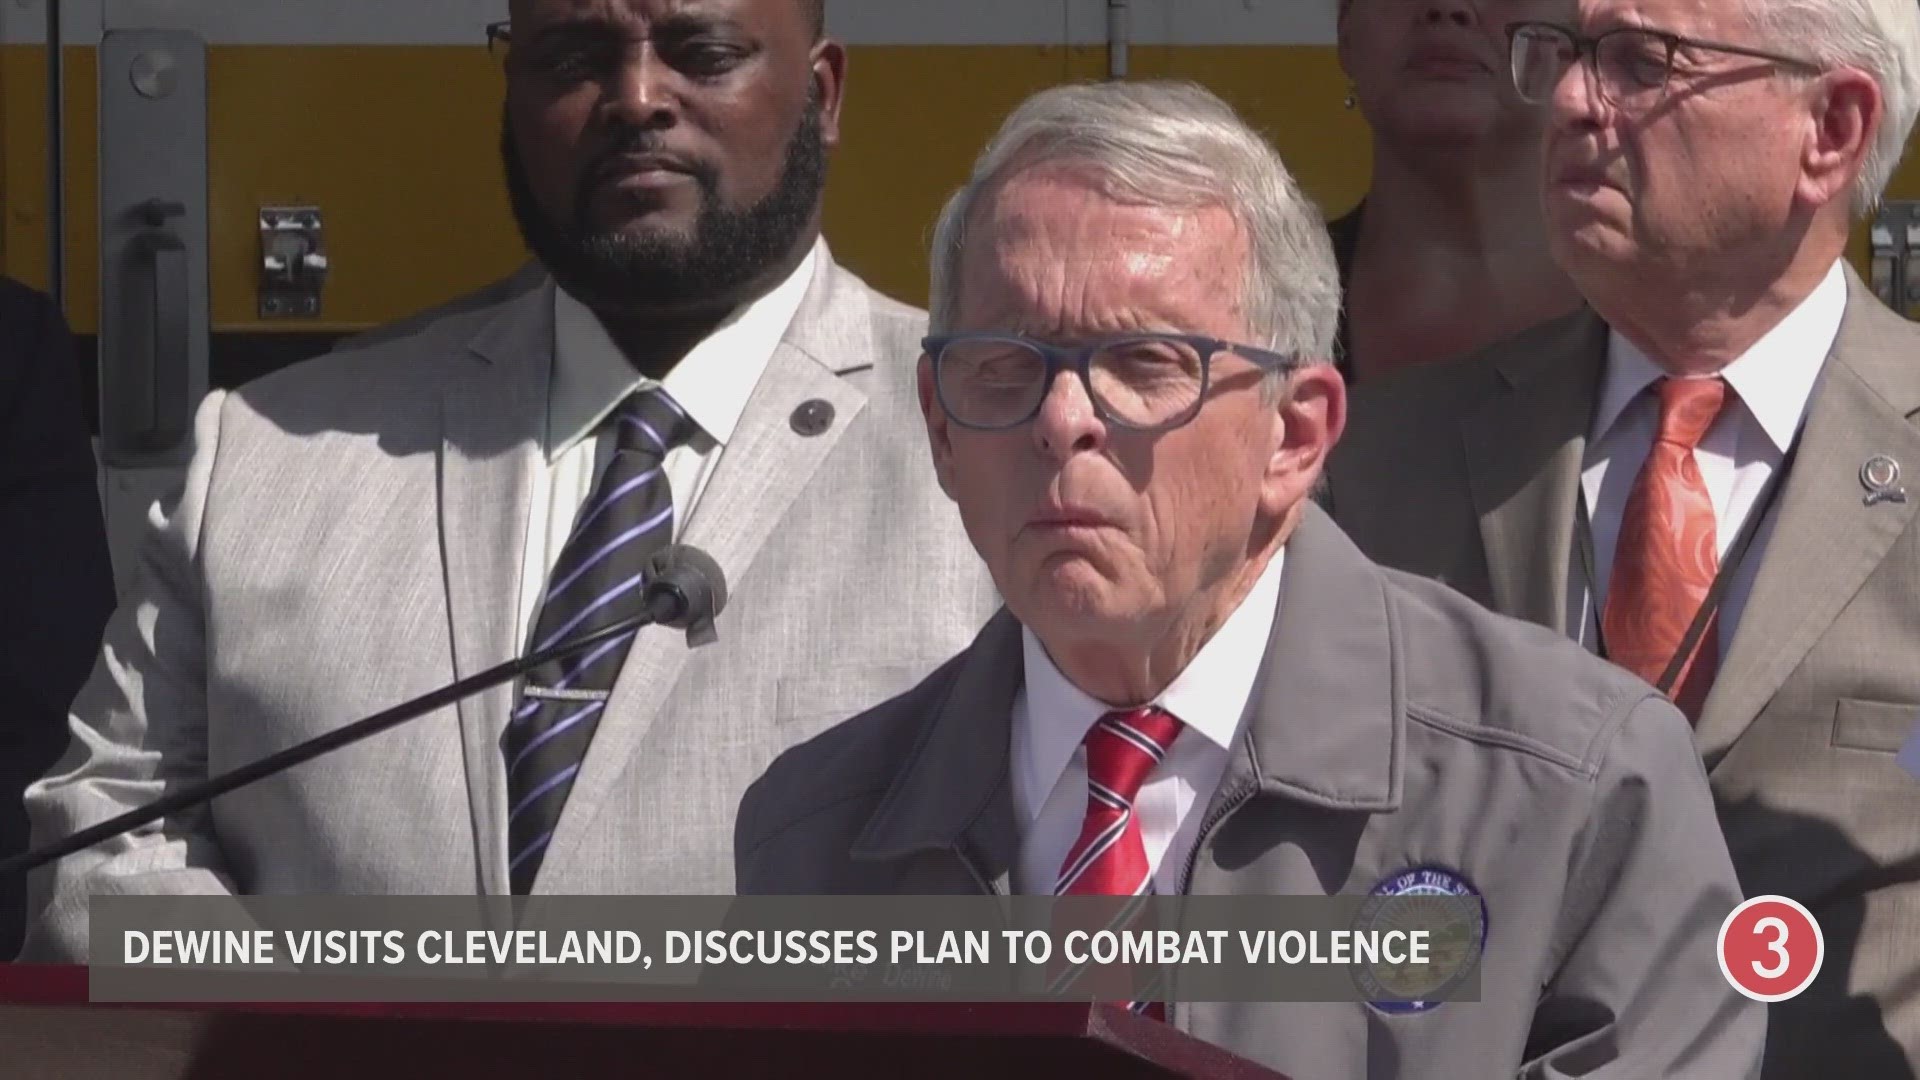 Ohio Gov. Mike DeWine visited Cleveland on Wednesday announce a "surge initiative" to combat crime in the city.